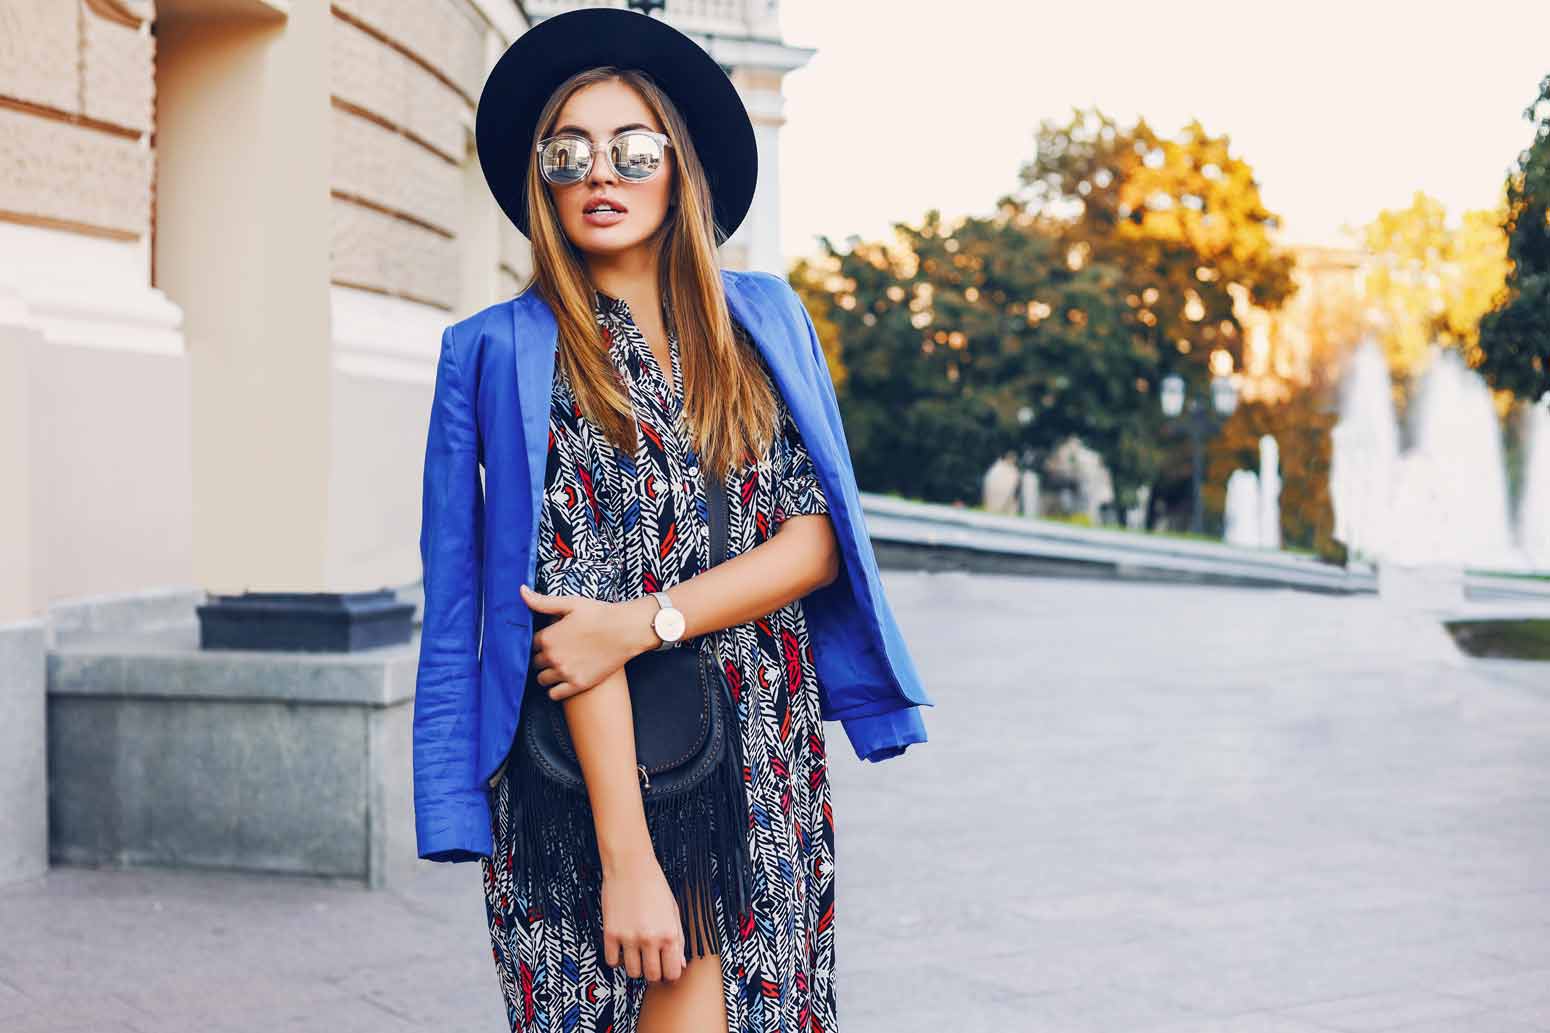 fashionable woman in a dress with a blue coat over her shoulders and sunglasses and a hat embodies the art of dressing for yourself